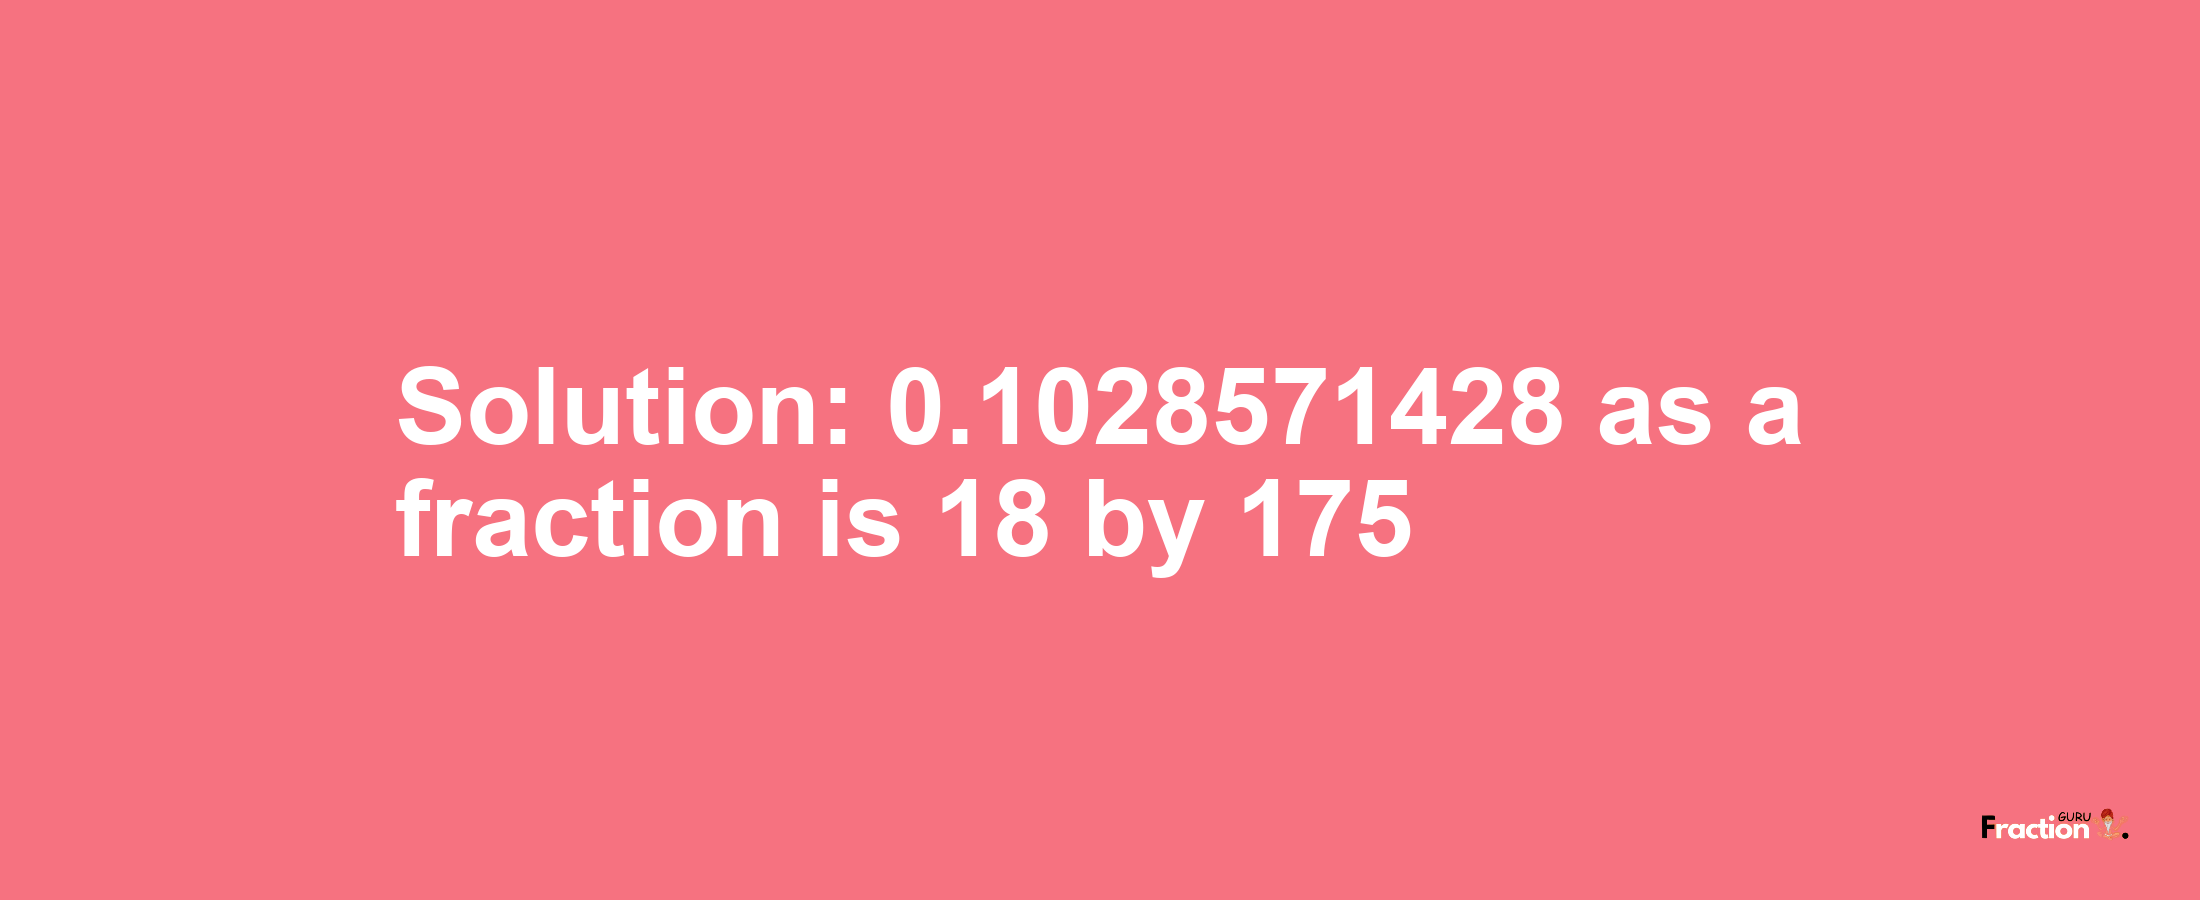 Solution:0.1028571428 as a fraction is 18/175